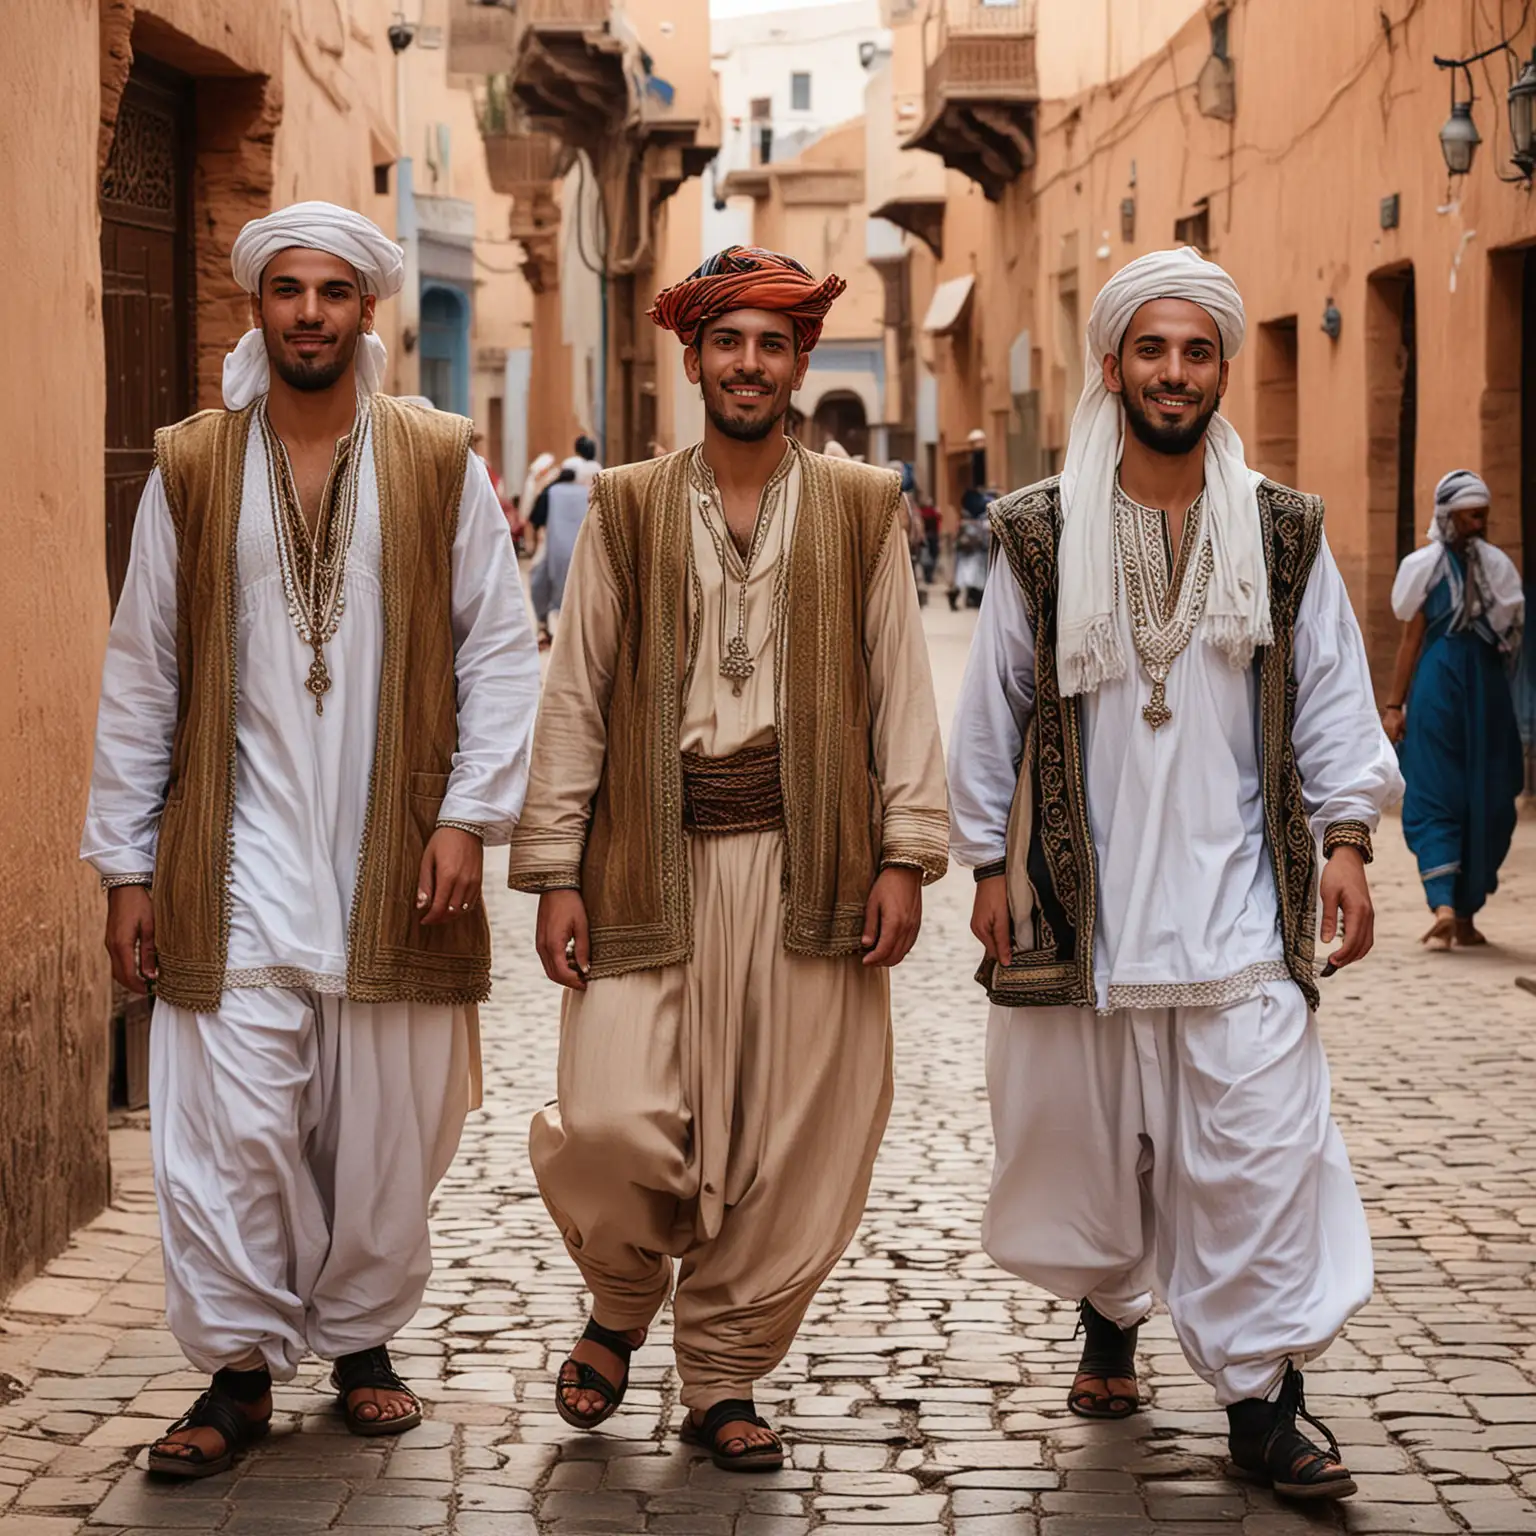 Moroccan men in traditional street clothes